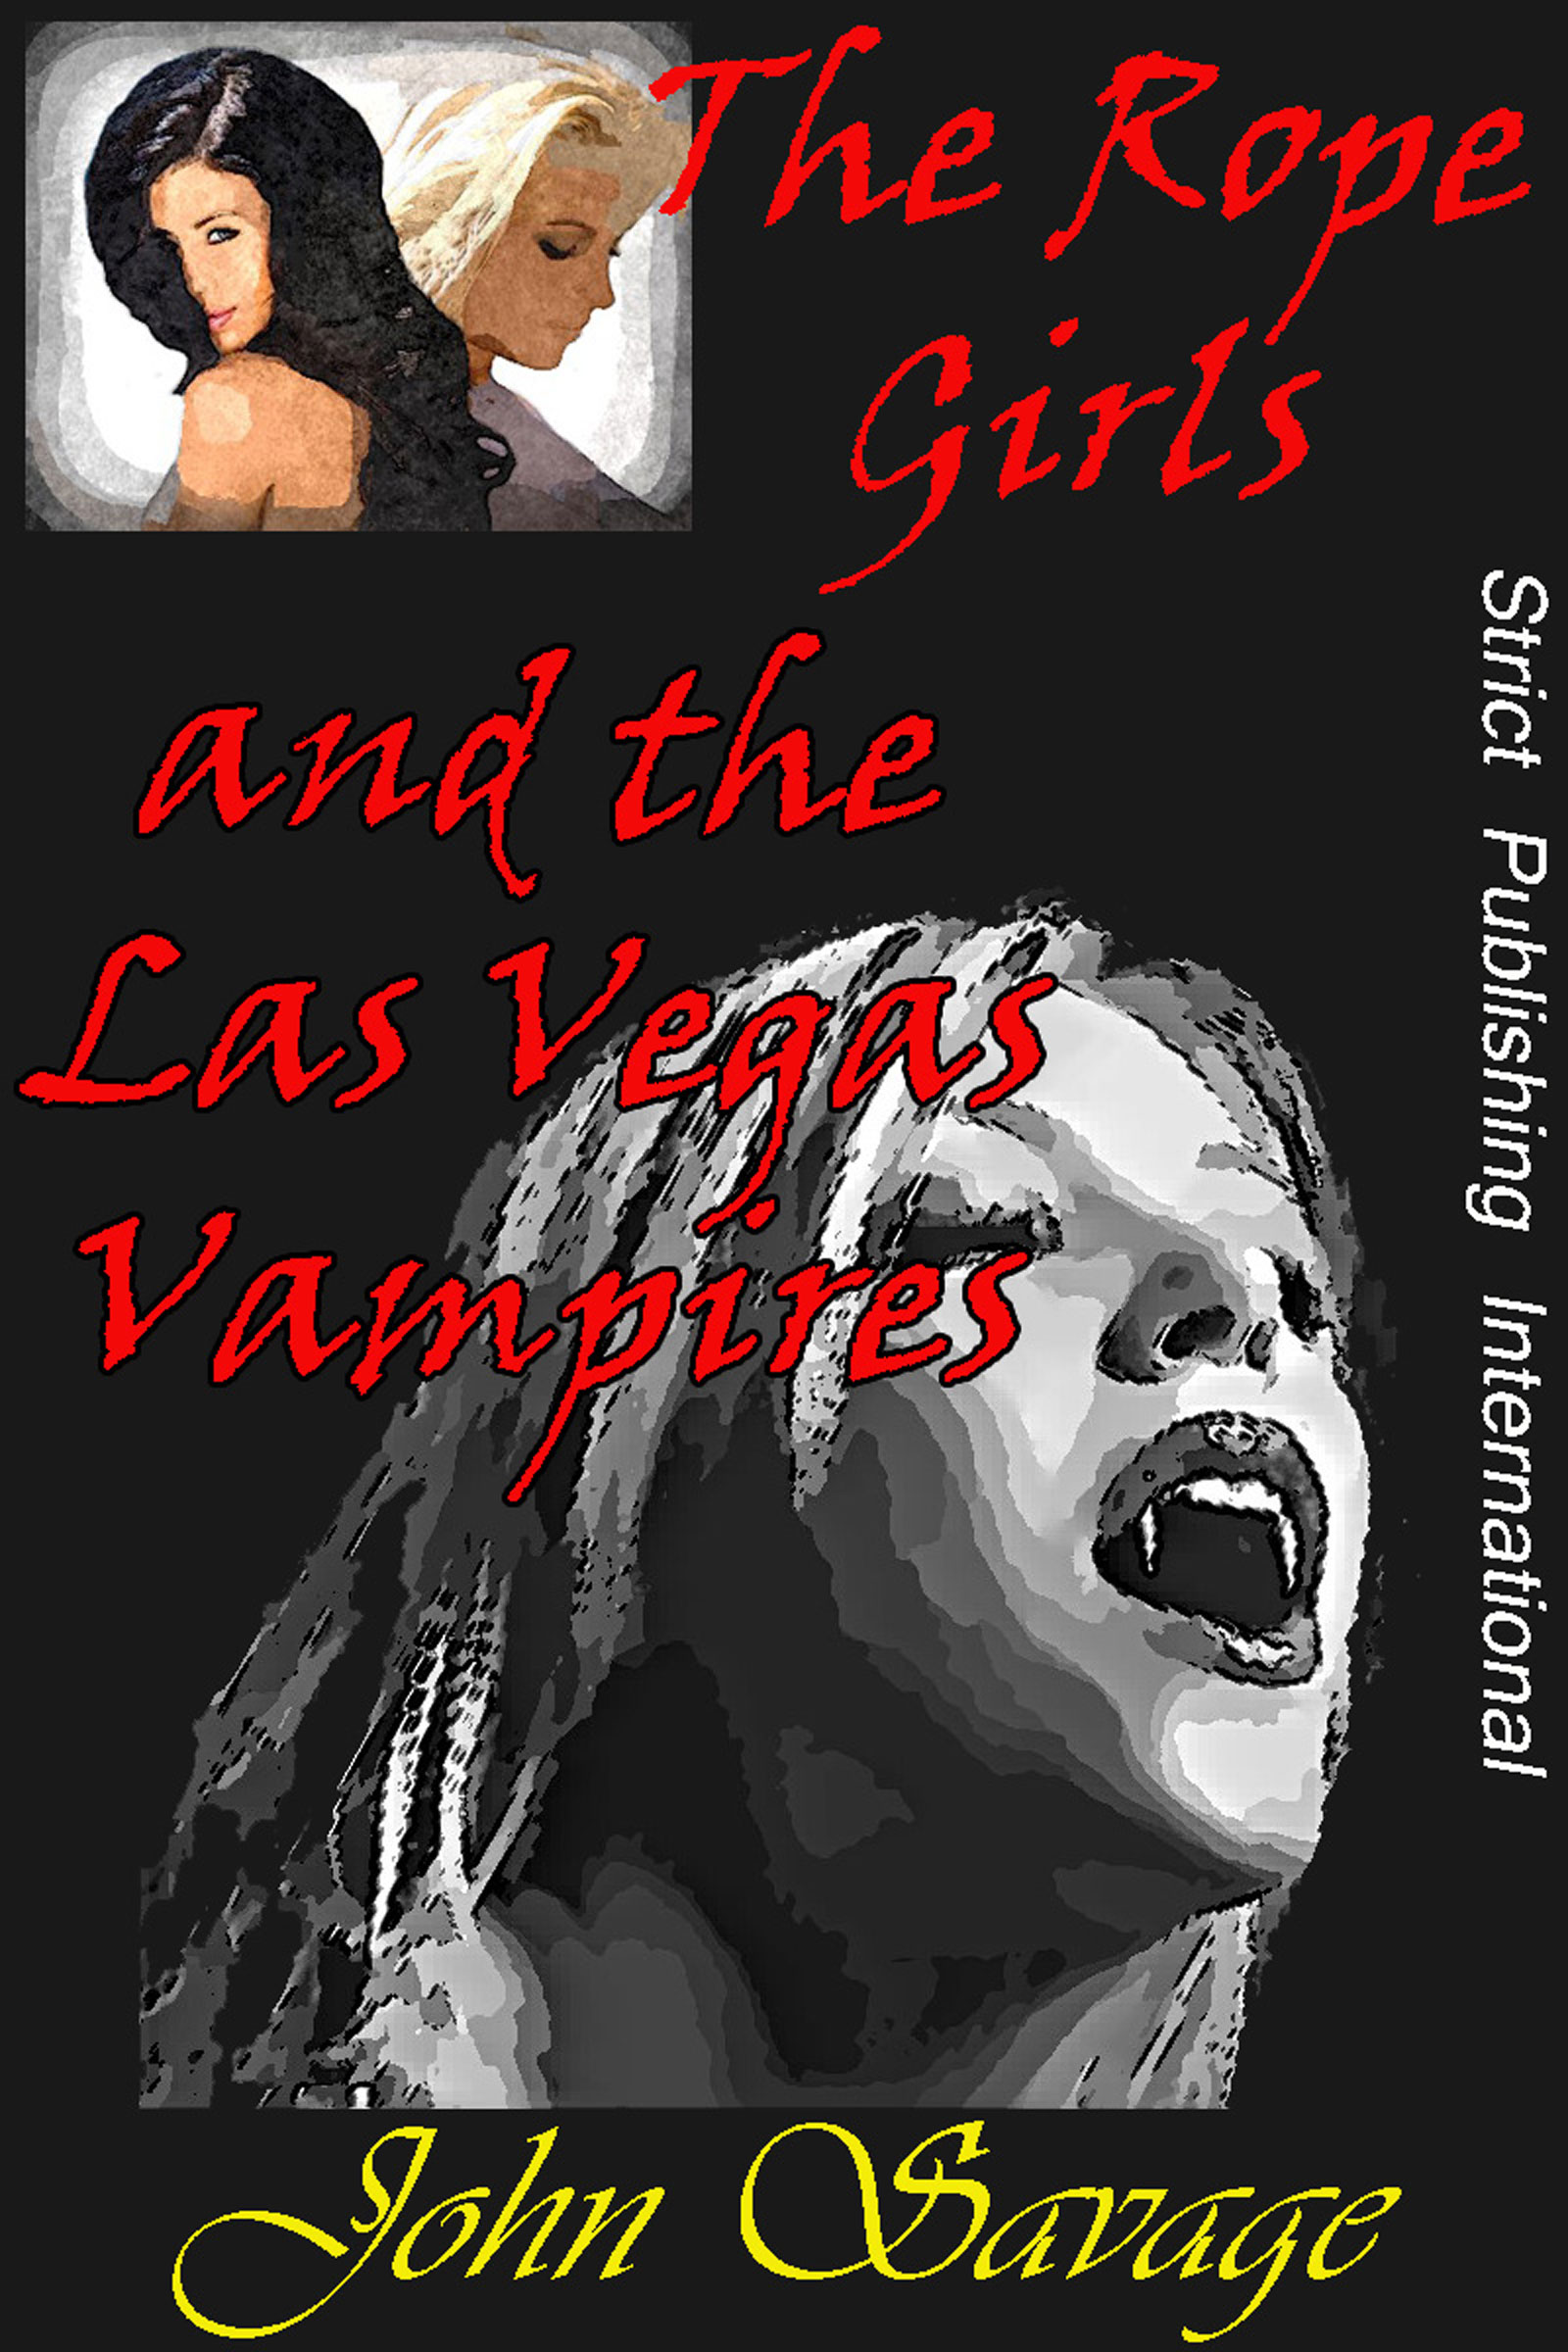 The Rope Girls and the Las Vegas Vampires